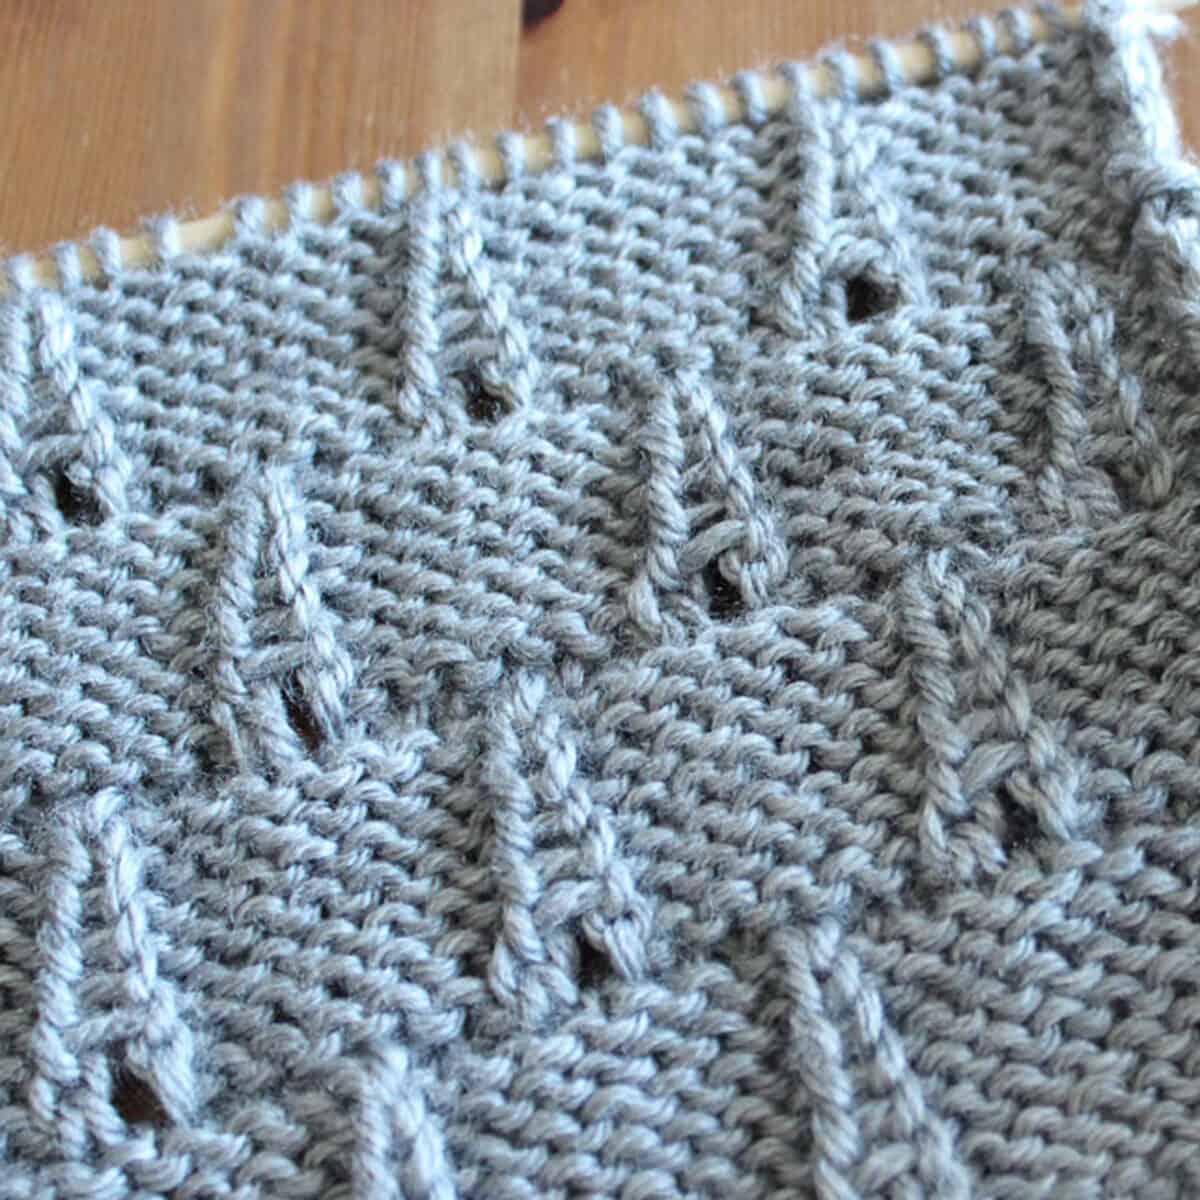 Eiffel Tower Eyelet Stitch Knitting Pattern texture in gray color yarn on knitting needle.